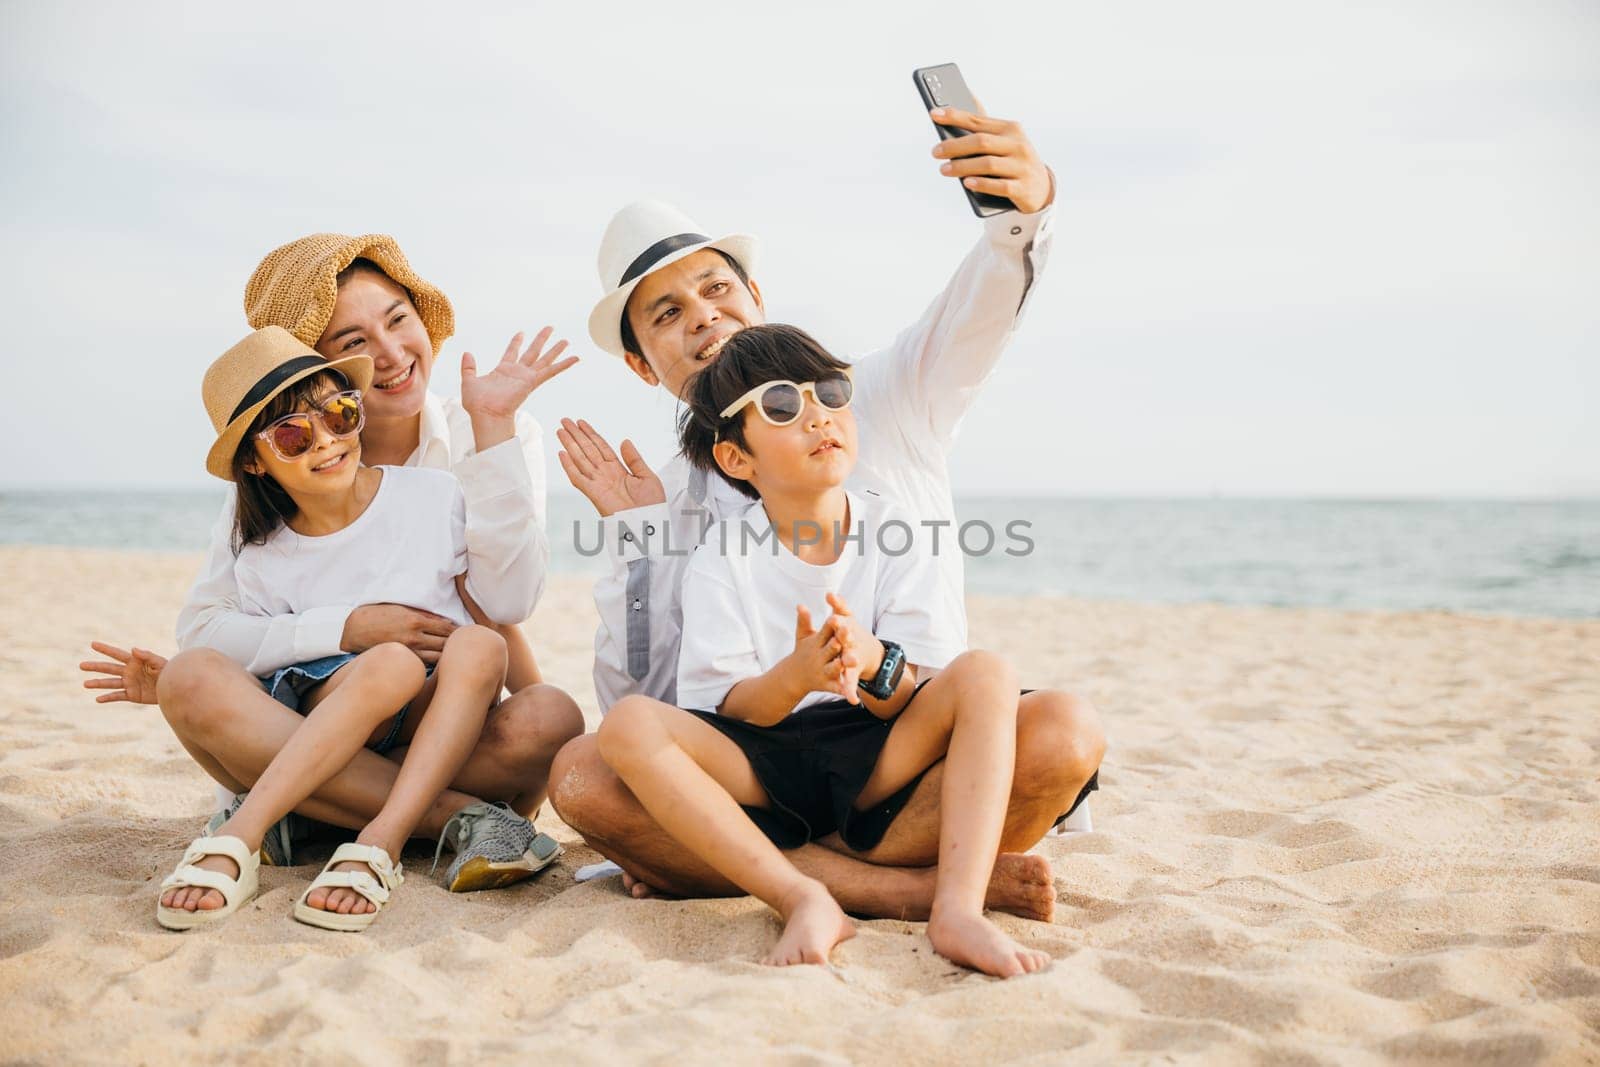 Summer joy on display as a happy family takes a lively selfie on the beach near the sea. Laughter smiles and the warmth of togetherness make this portrait a perfect capture of family happiness. by Sorapop